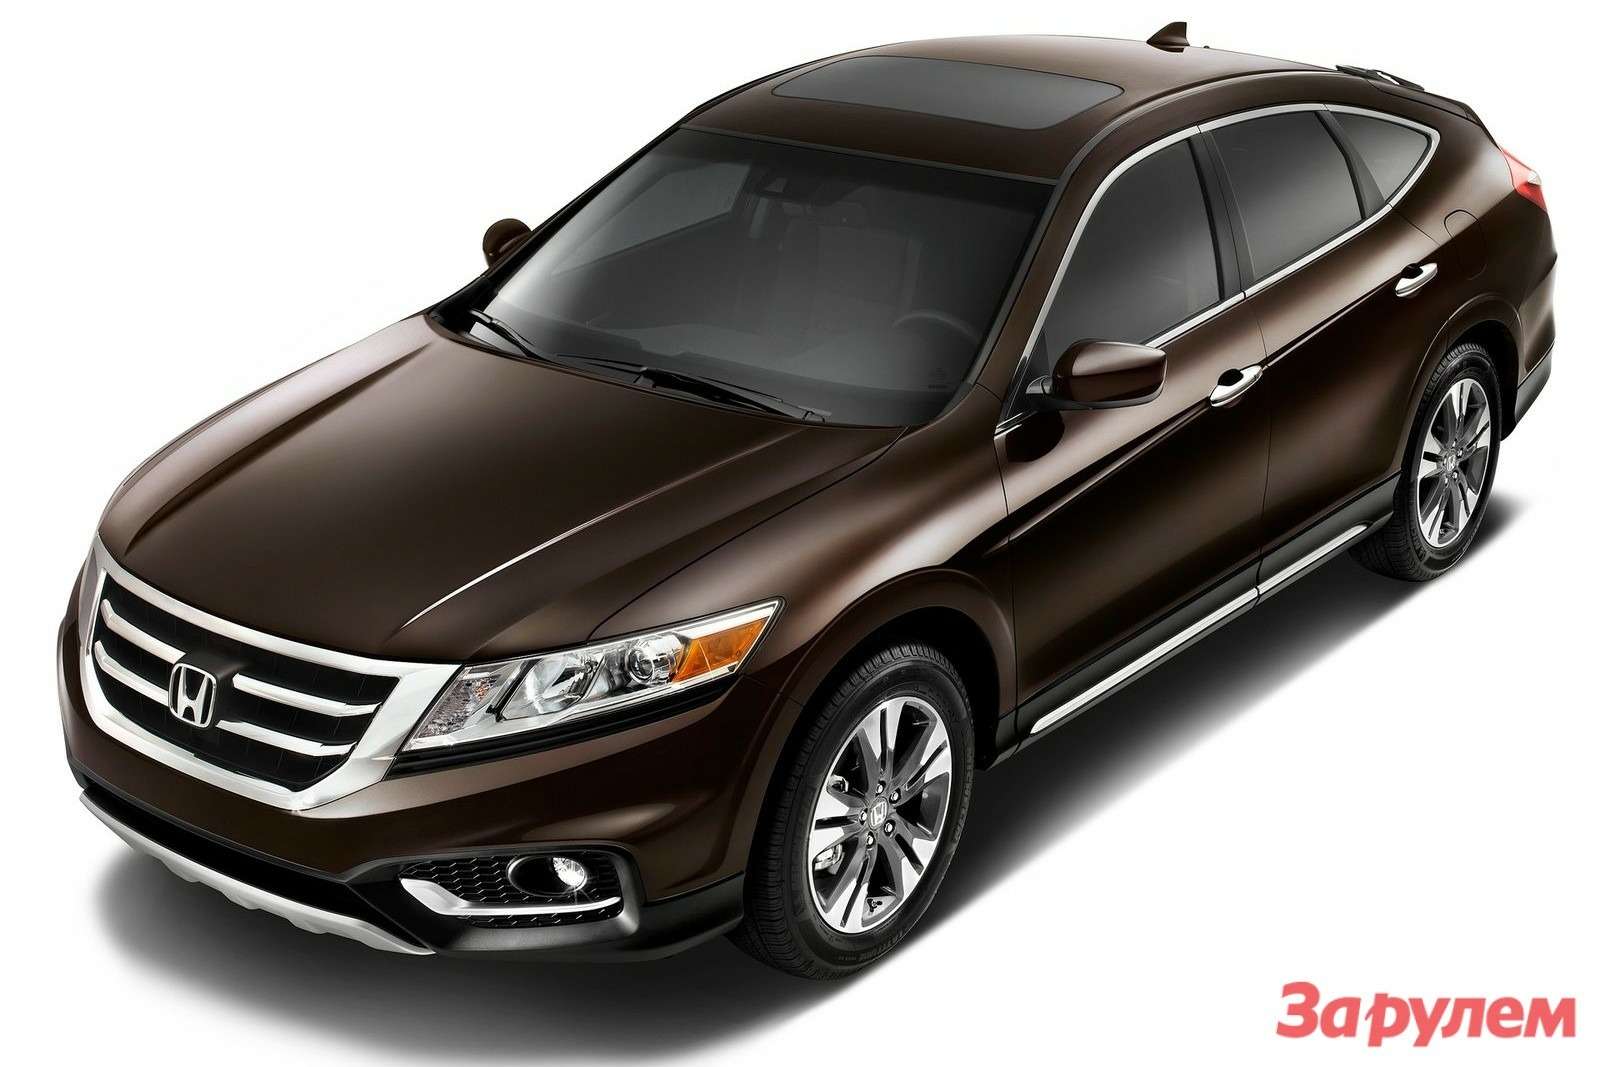 2013 MY Honda Crosstour side-front view 2